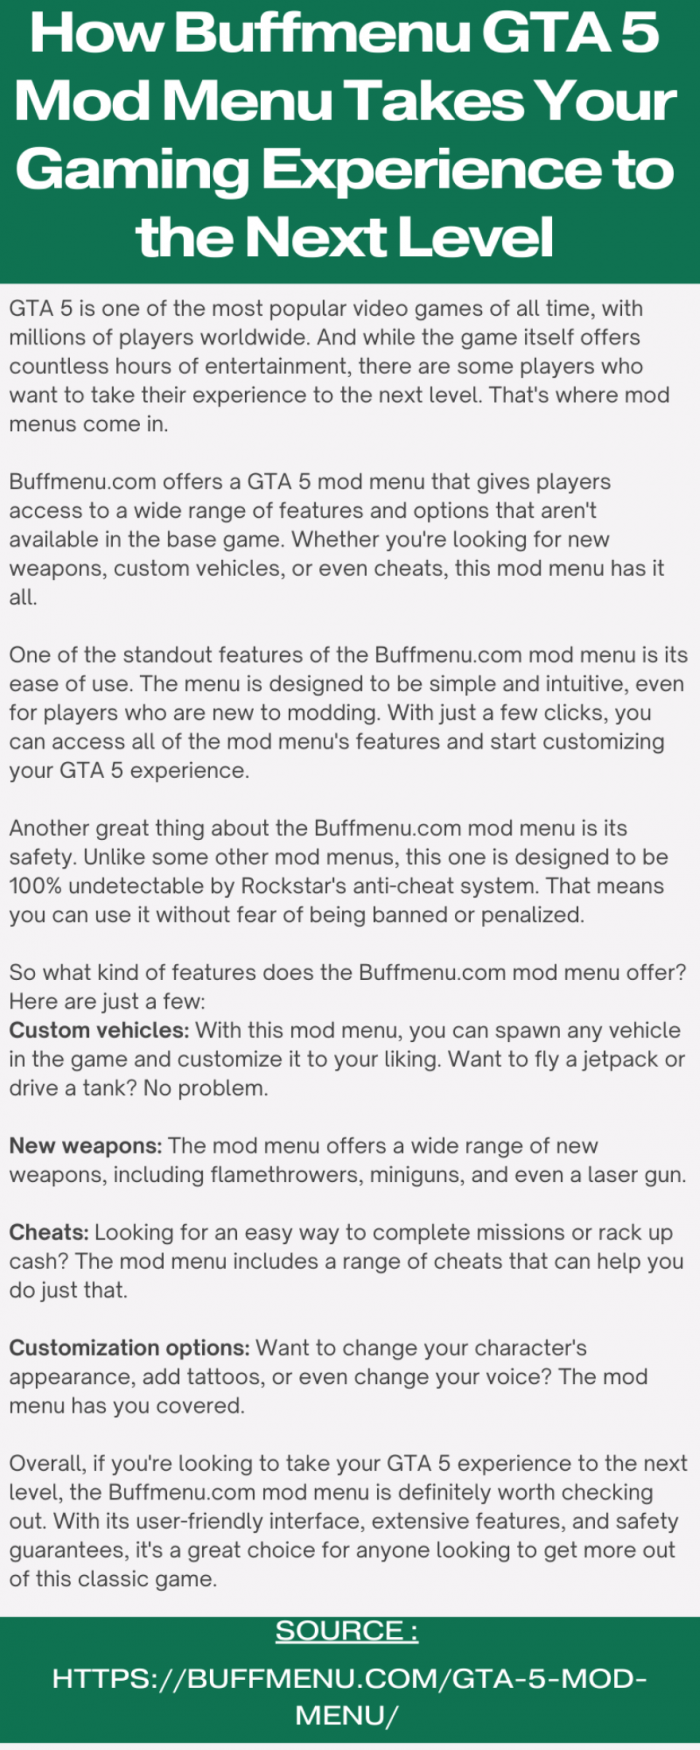 How to Customize Your GTA 5 Experience with Buffmenu Extensive Mod Menu Features